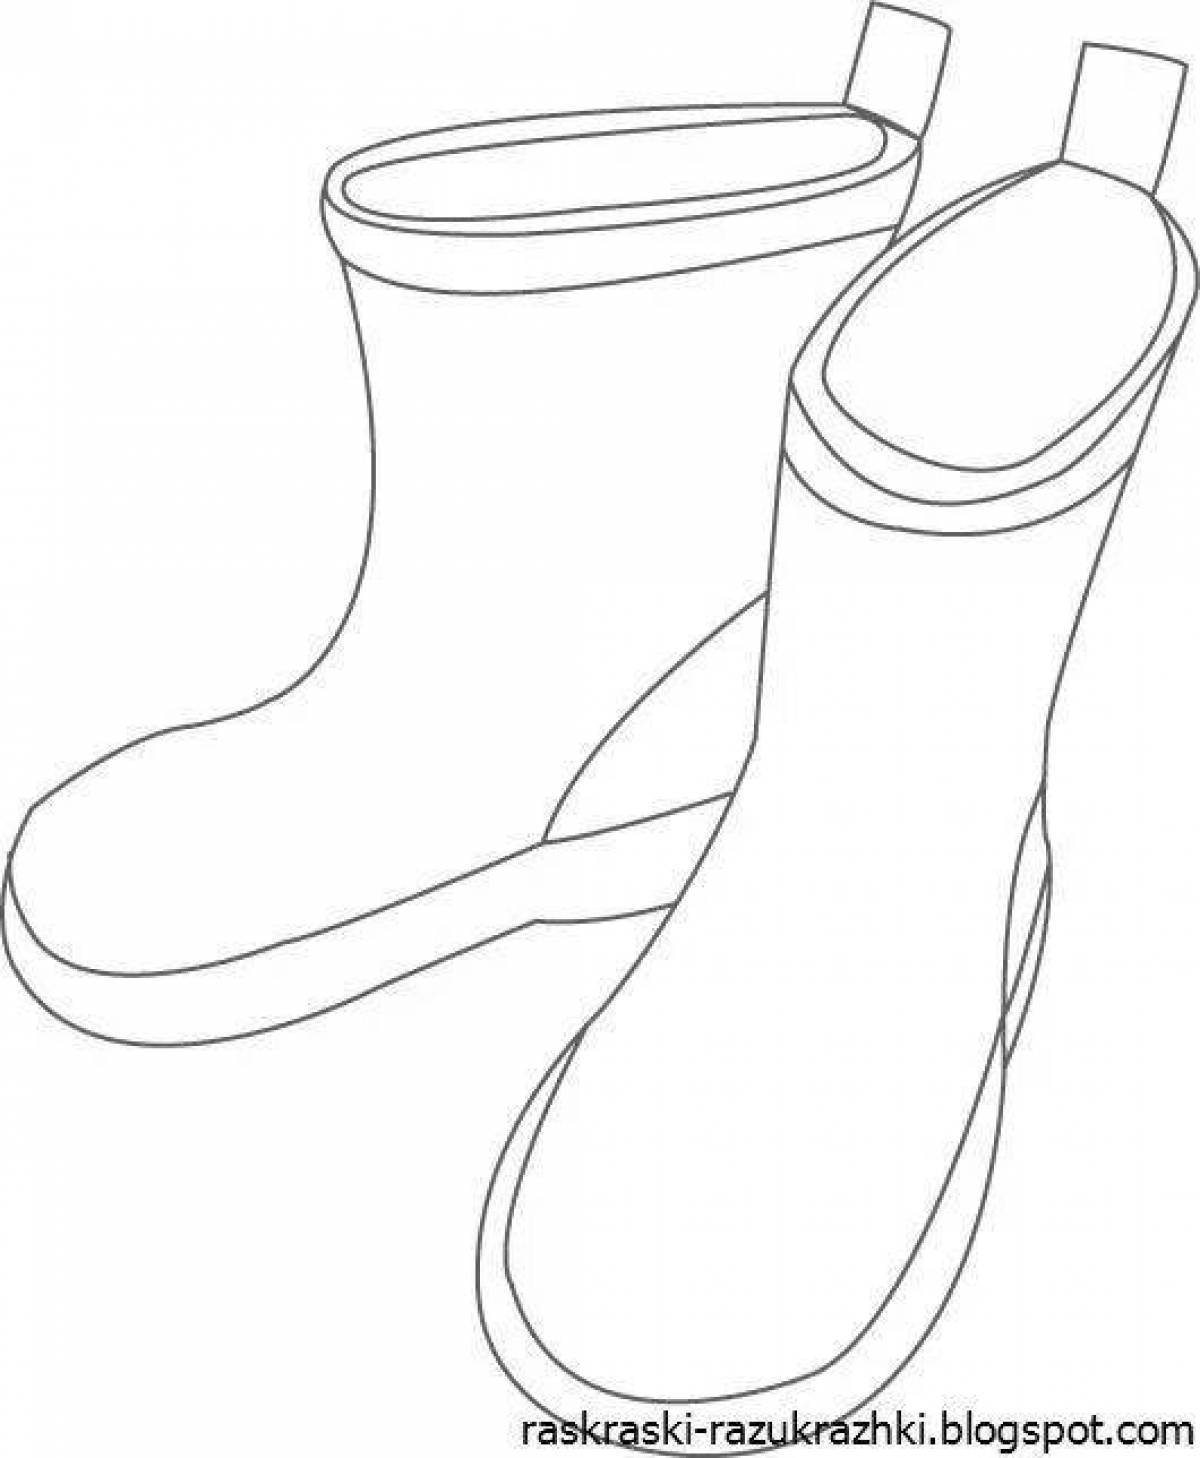 Coloring bright boots for children